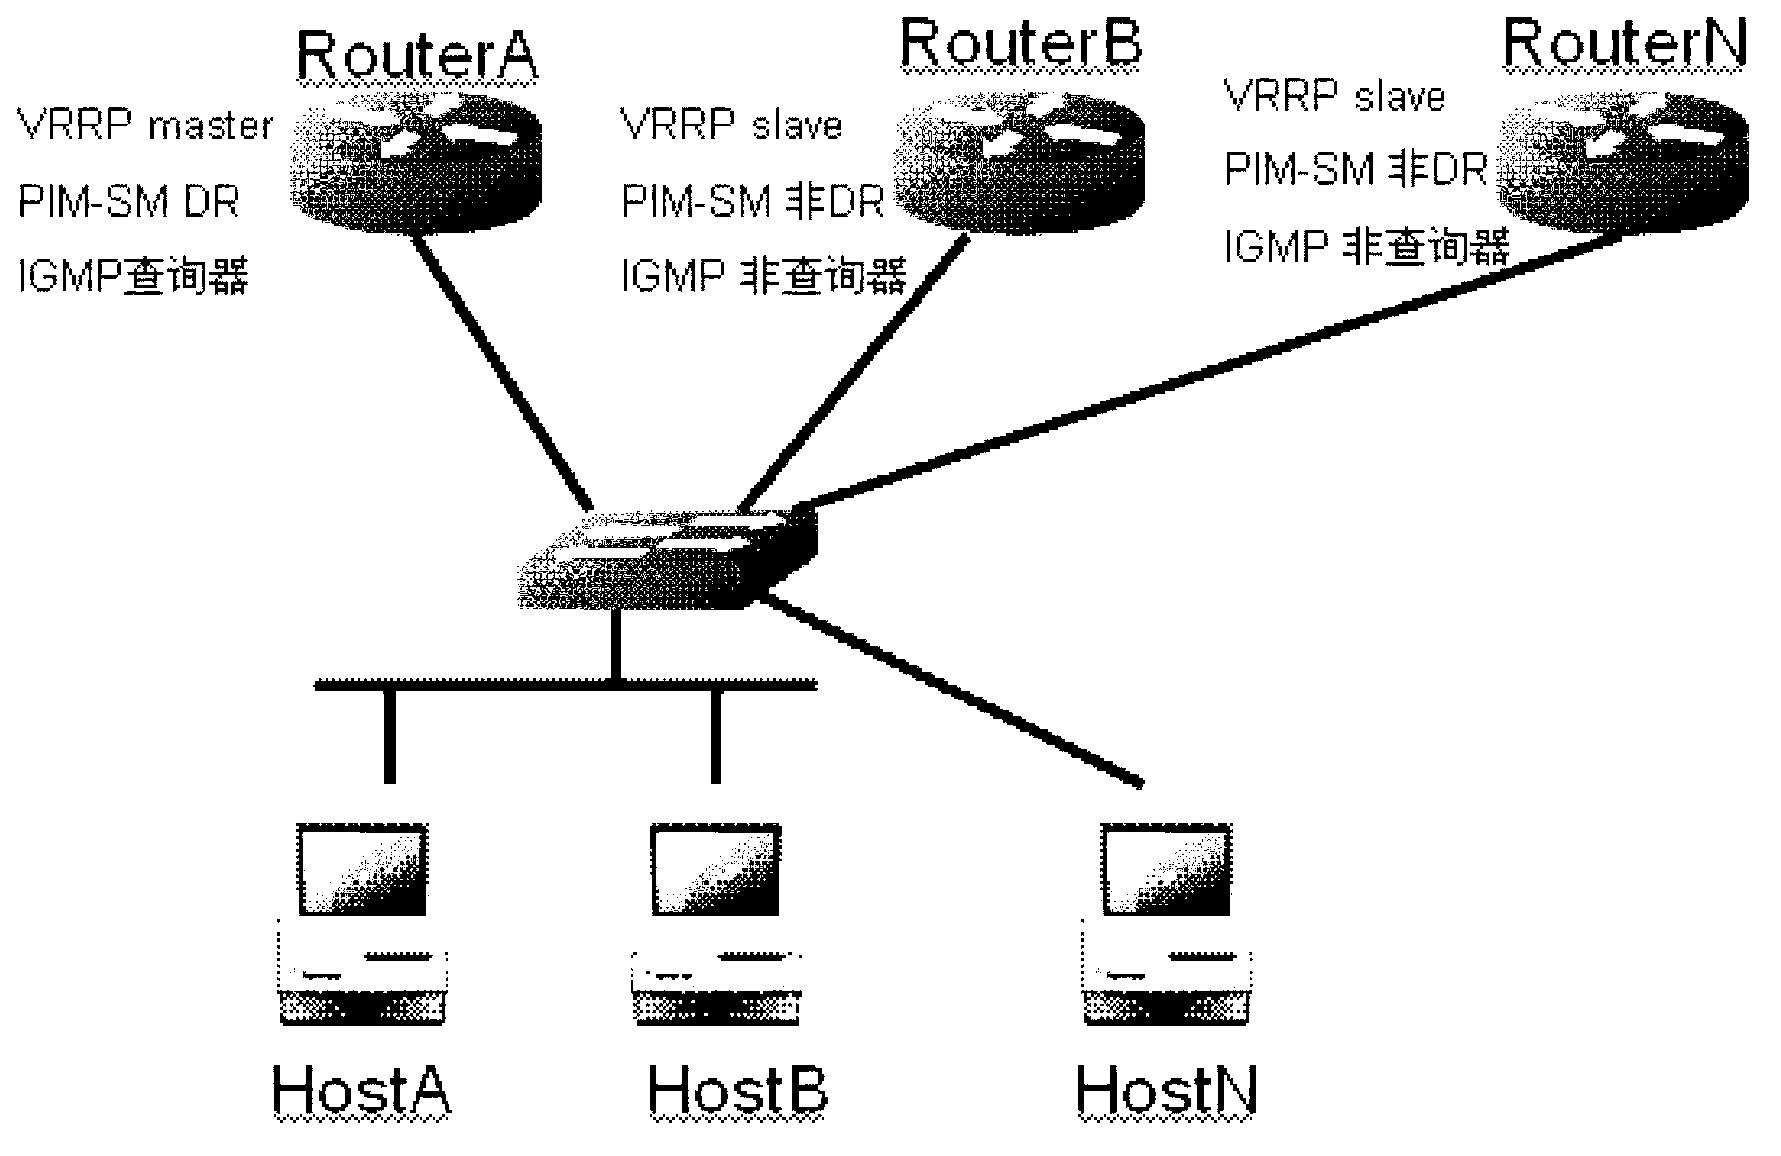 Unified electoral method of PIM-SM (Protocol Independent Multicast-Sparse Mode) designated router and IGMP (Internet Group Management Protocol) querier